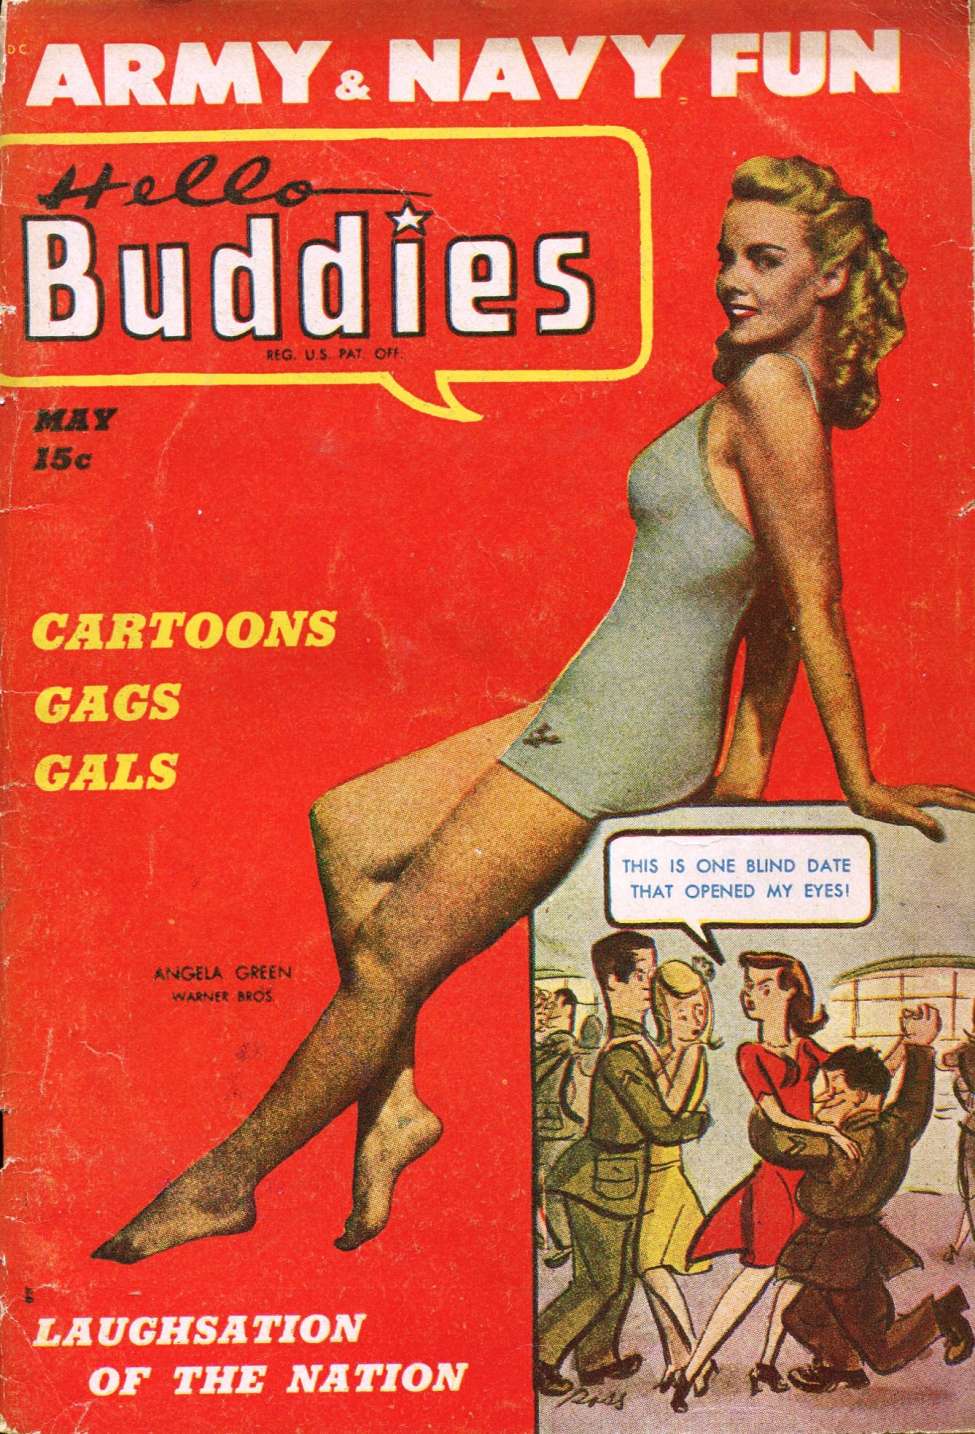 Comic Book Cover For Hello Buddies 23 (v4 3)